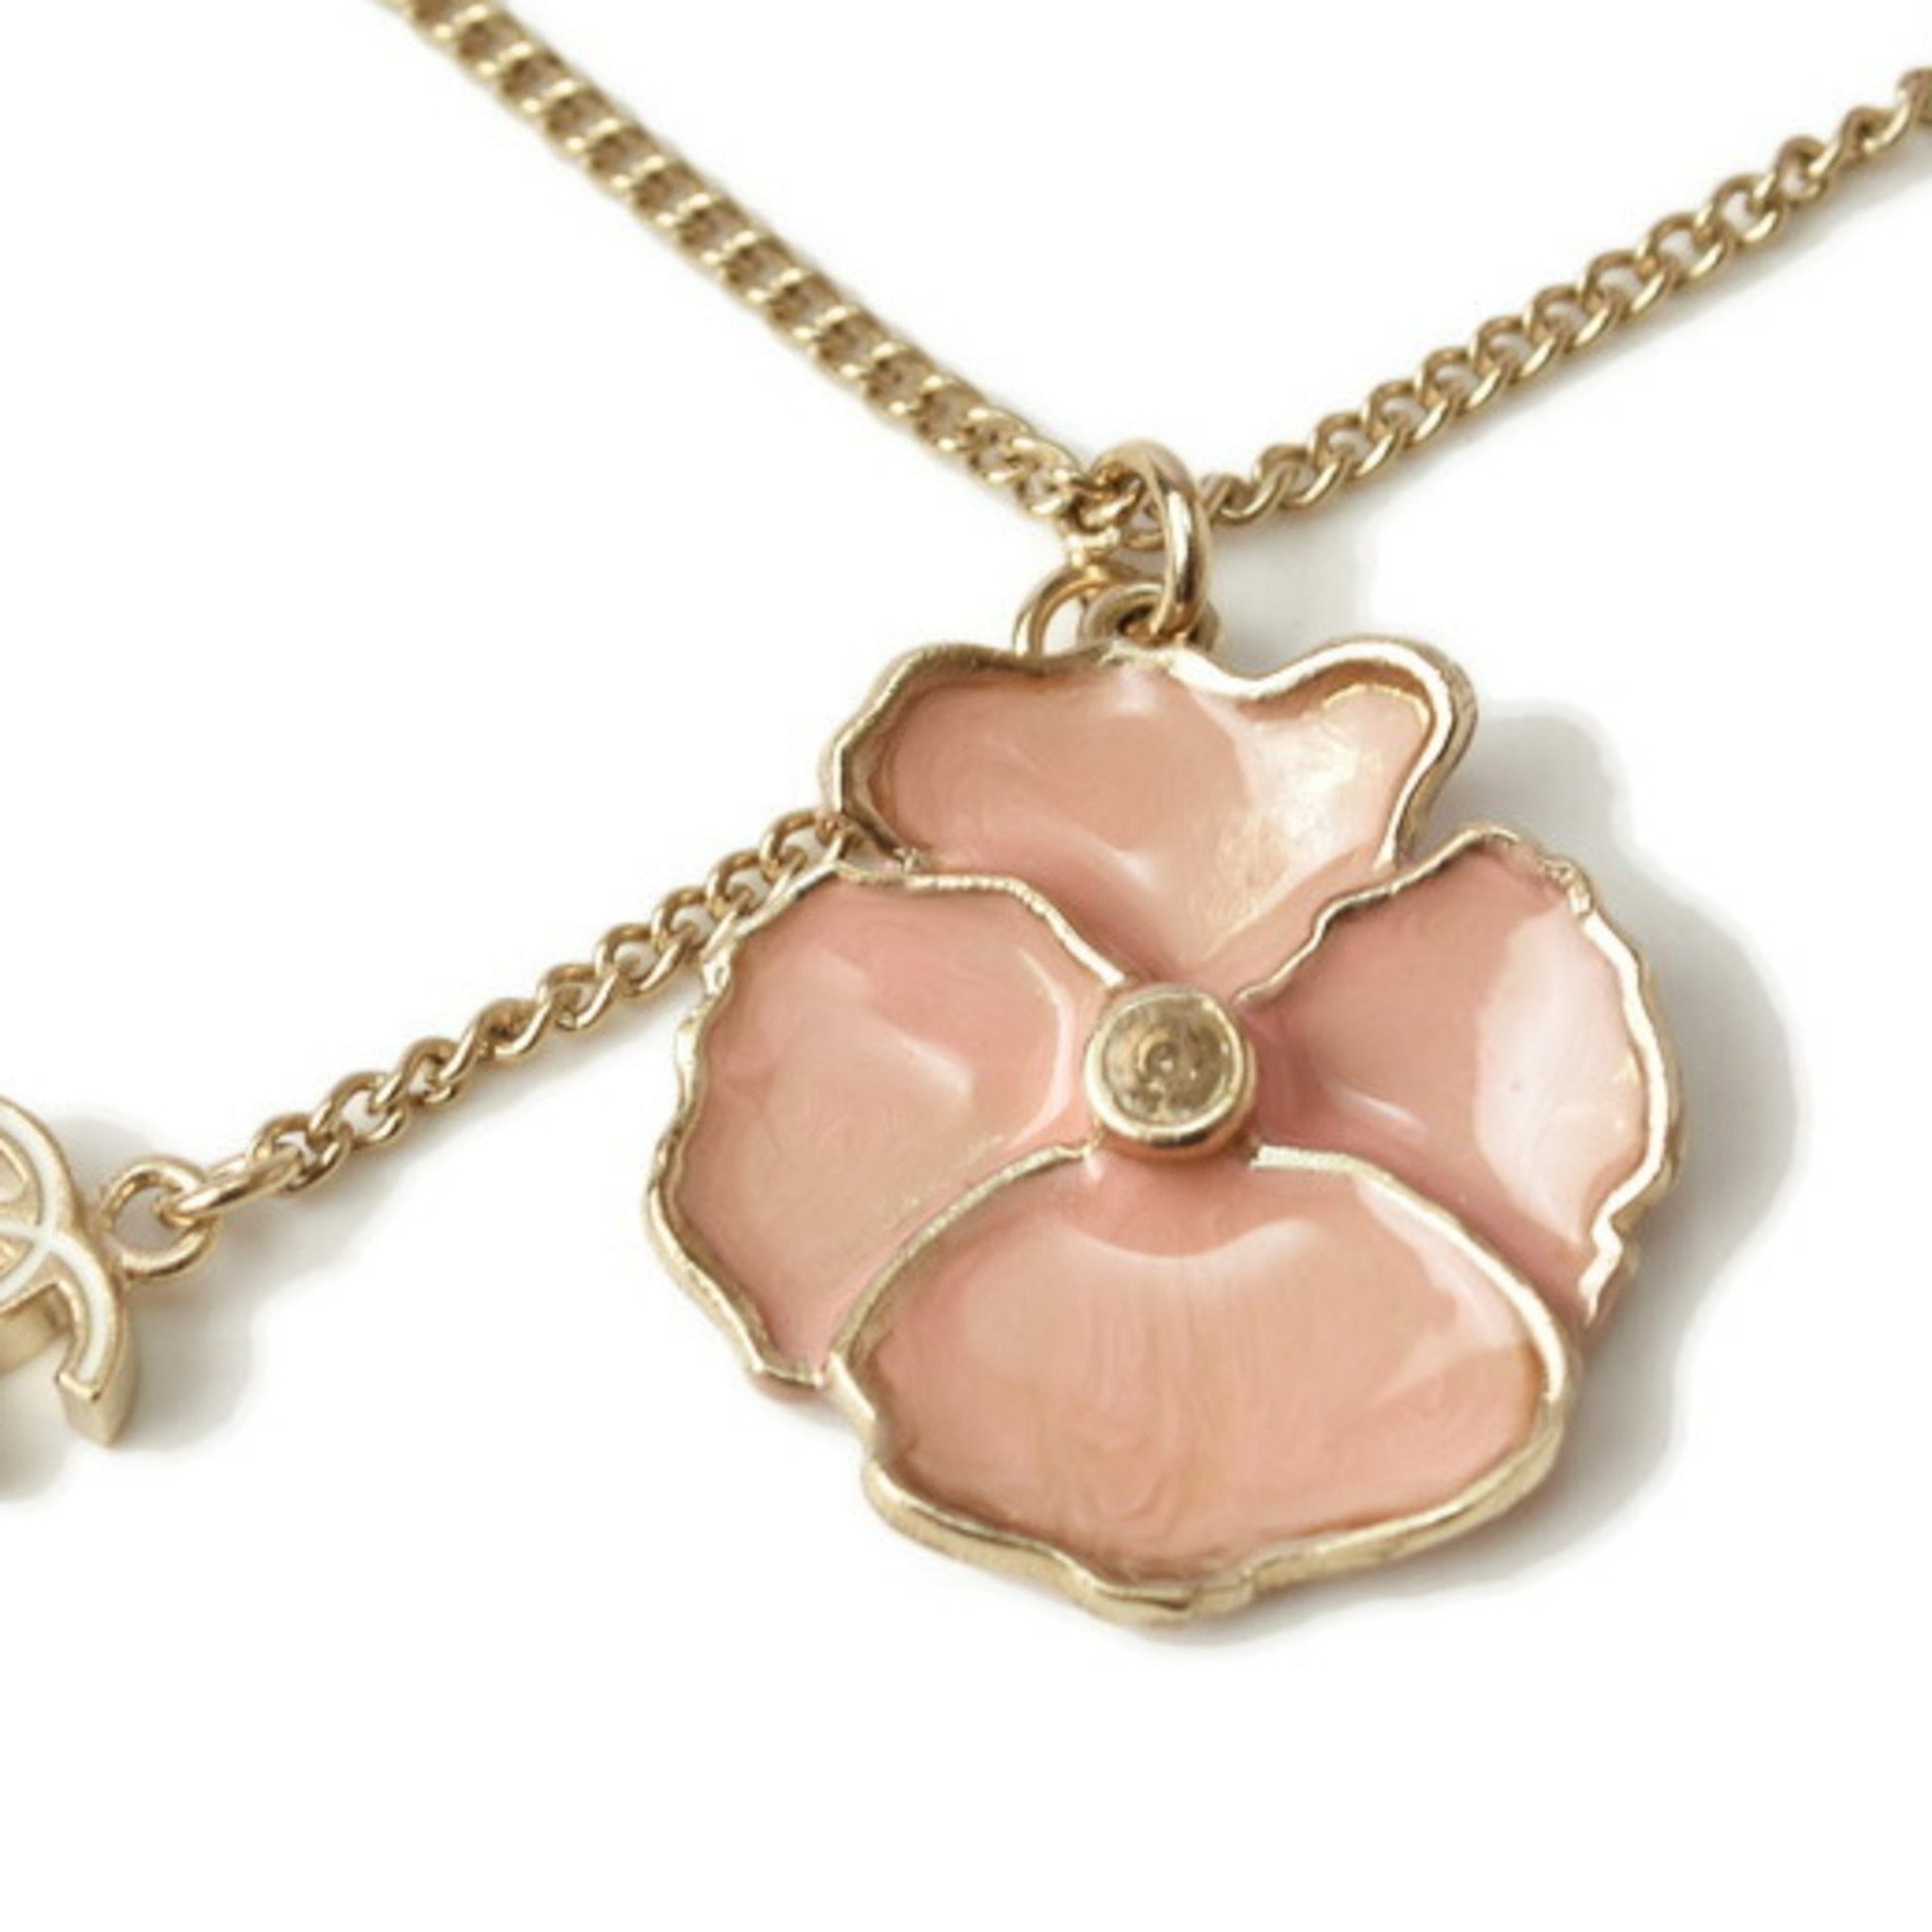 Chanel necklace/pendant CHANEL flower motif/coco mark/CC pink